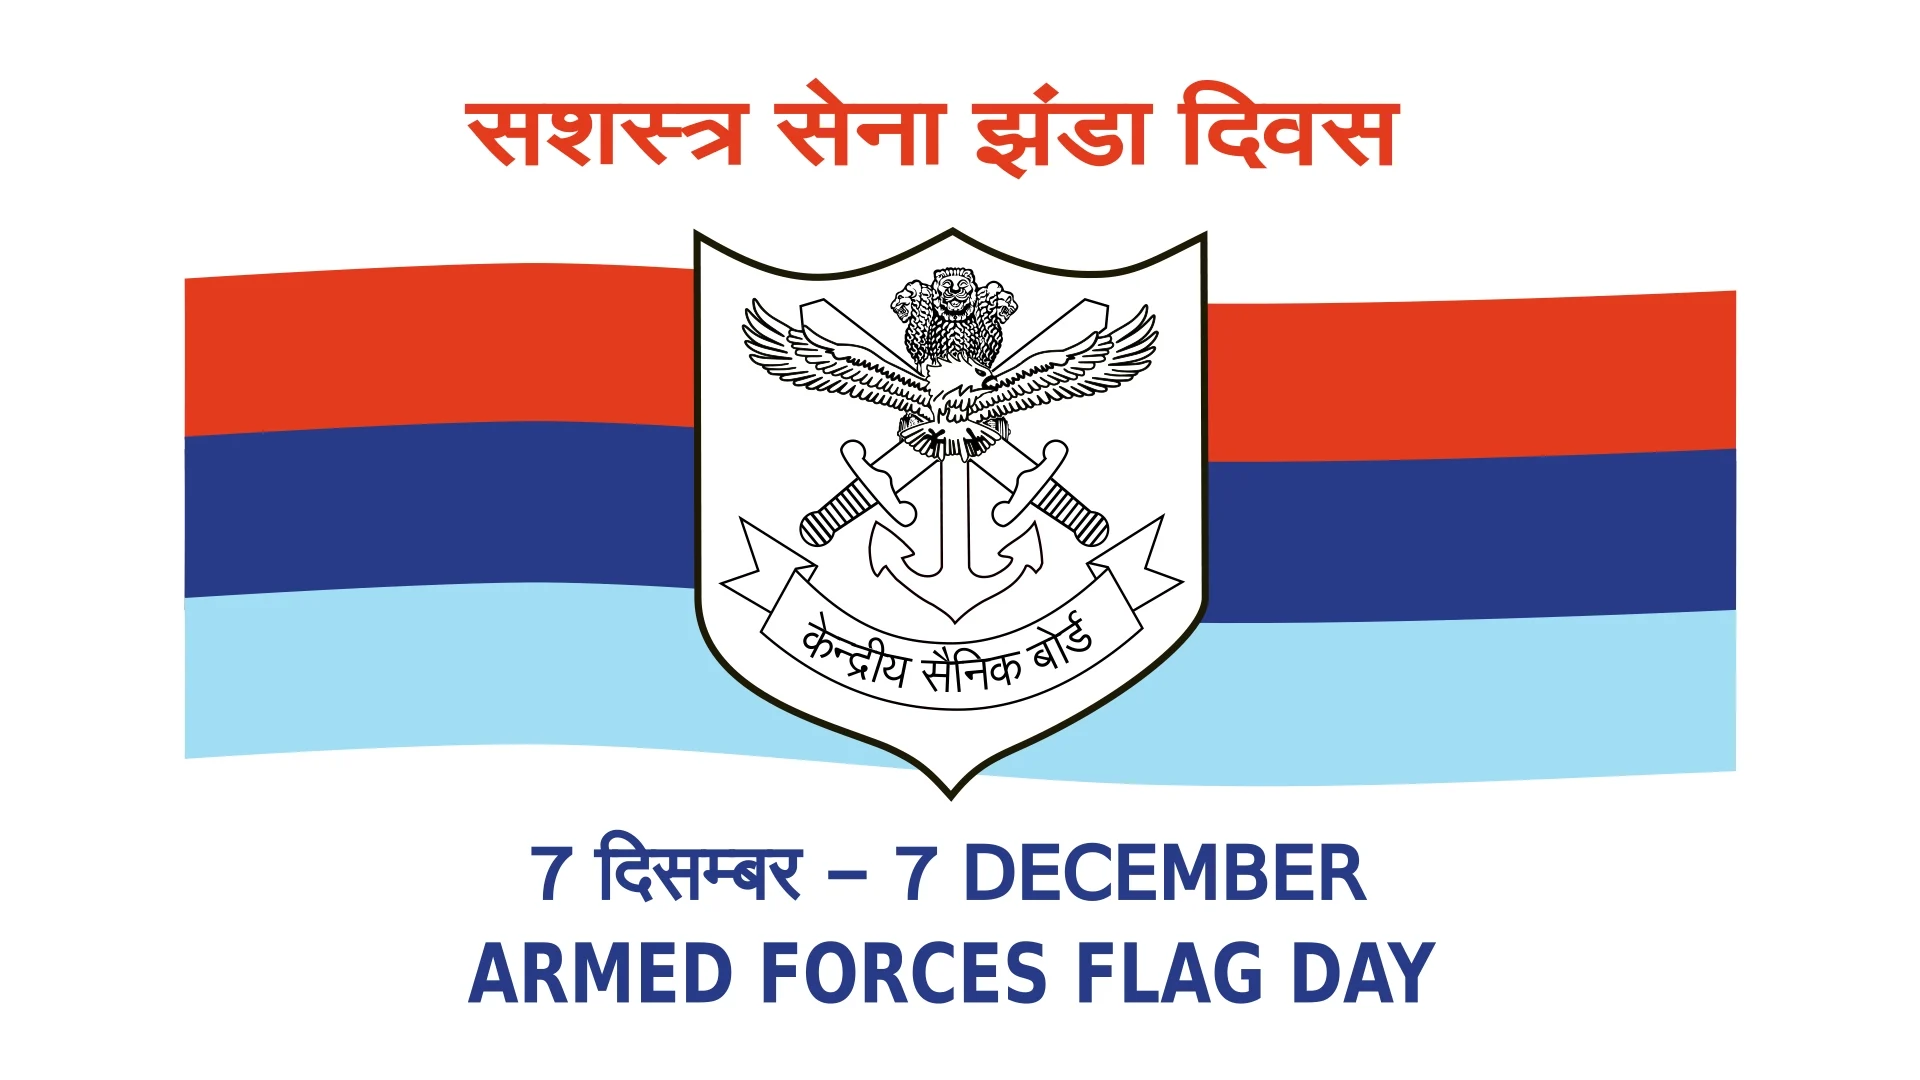 Armed Forces Flag Day This Post Design By The Revolution Deshbhakt Hindustani